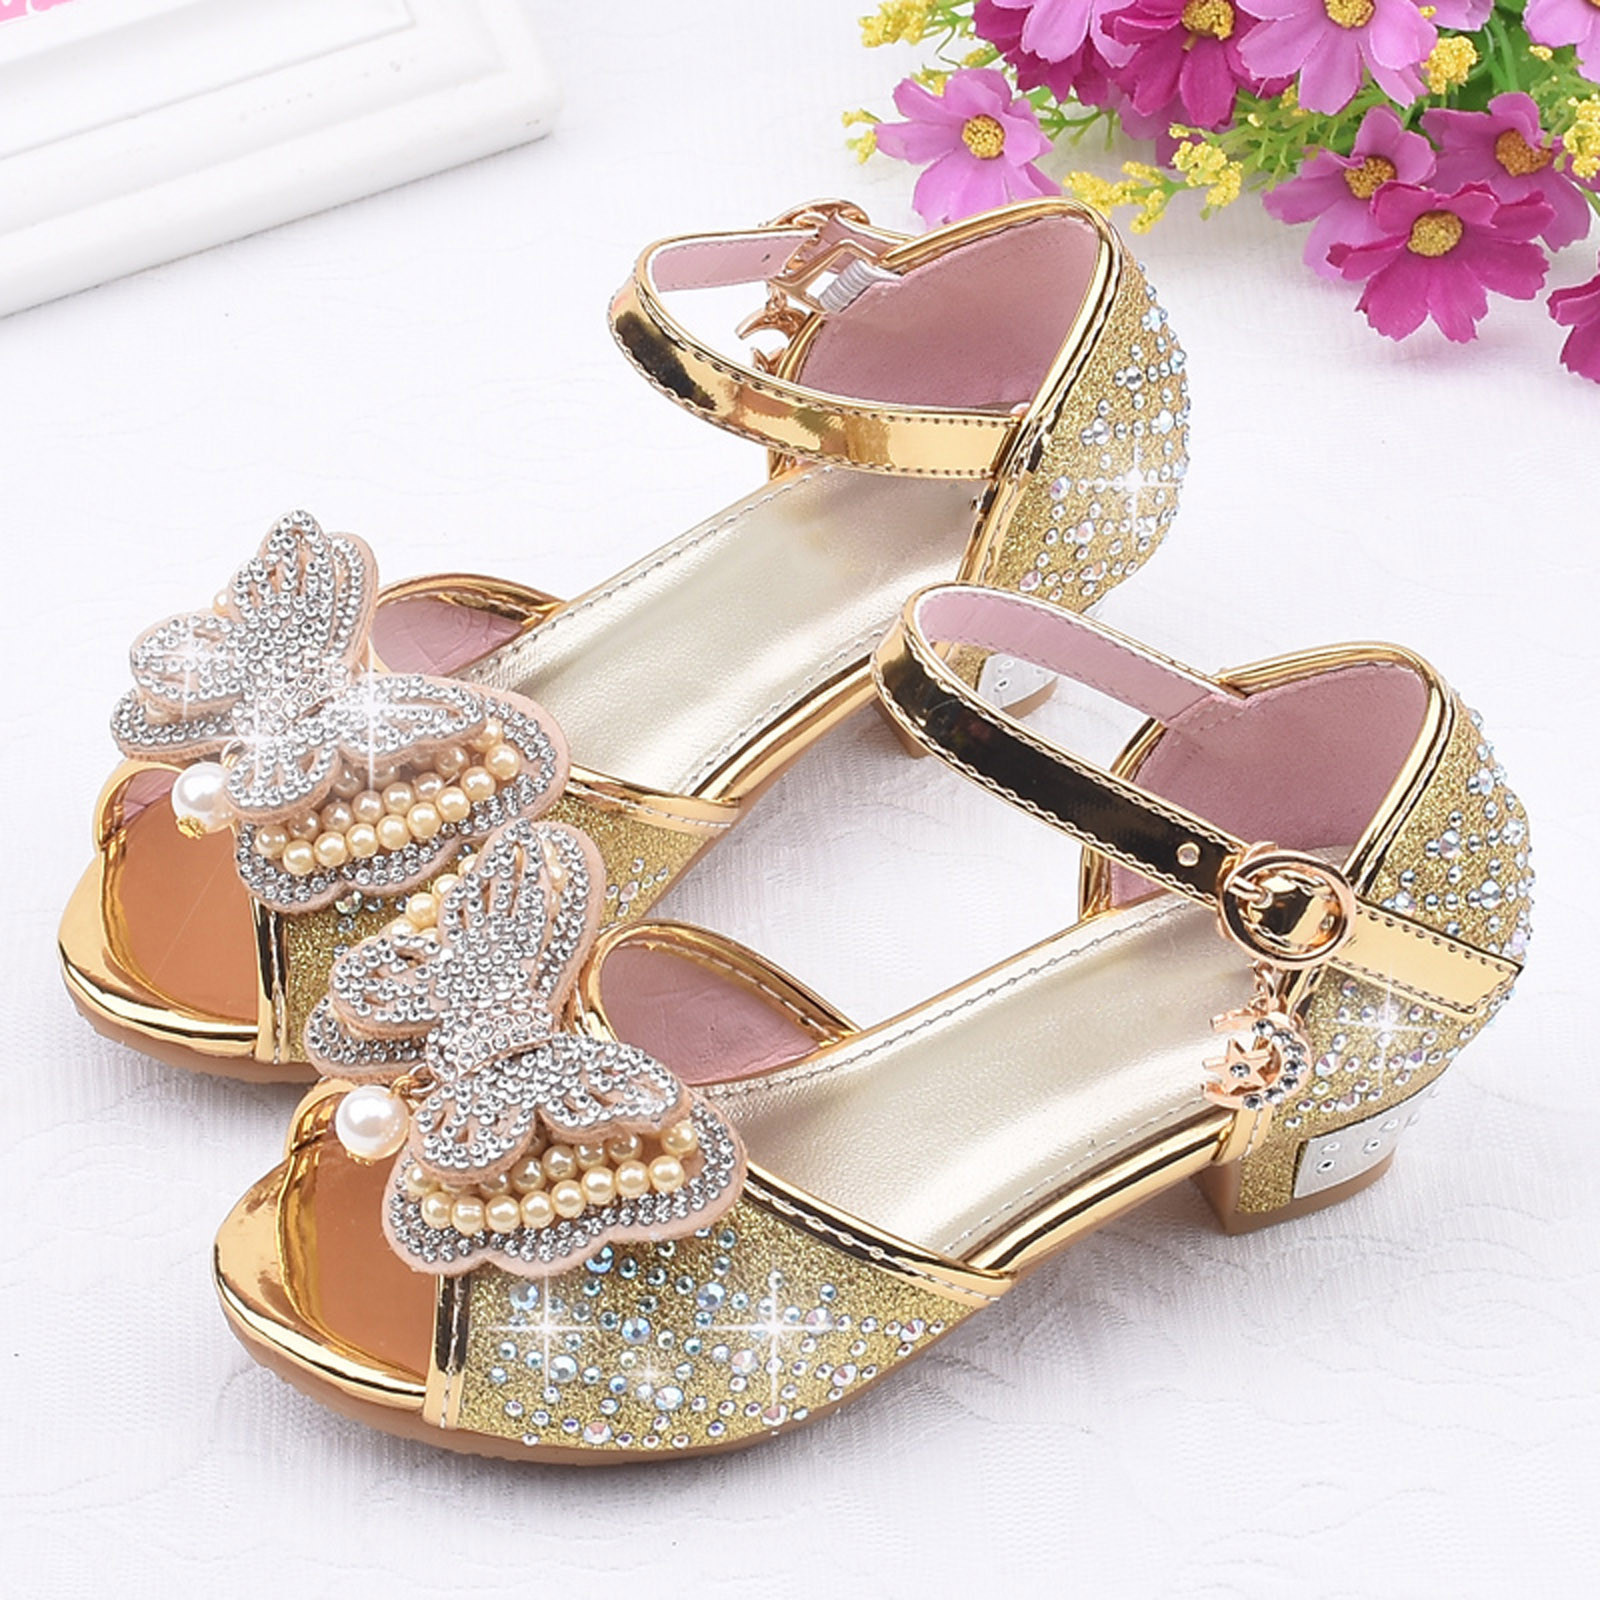 Penkiiy Children's Shoes Girls Fish Mouth Butterfly Pearl Rhinestone Crystal Princess Shoes Dance Shoes Toddler Sandals Wonder 5.5-6 Years Gold On Clearance - image 2 of 7